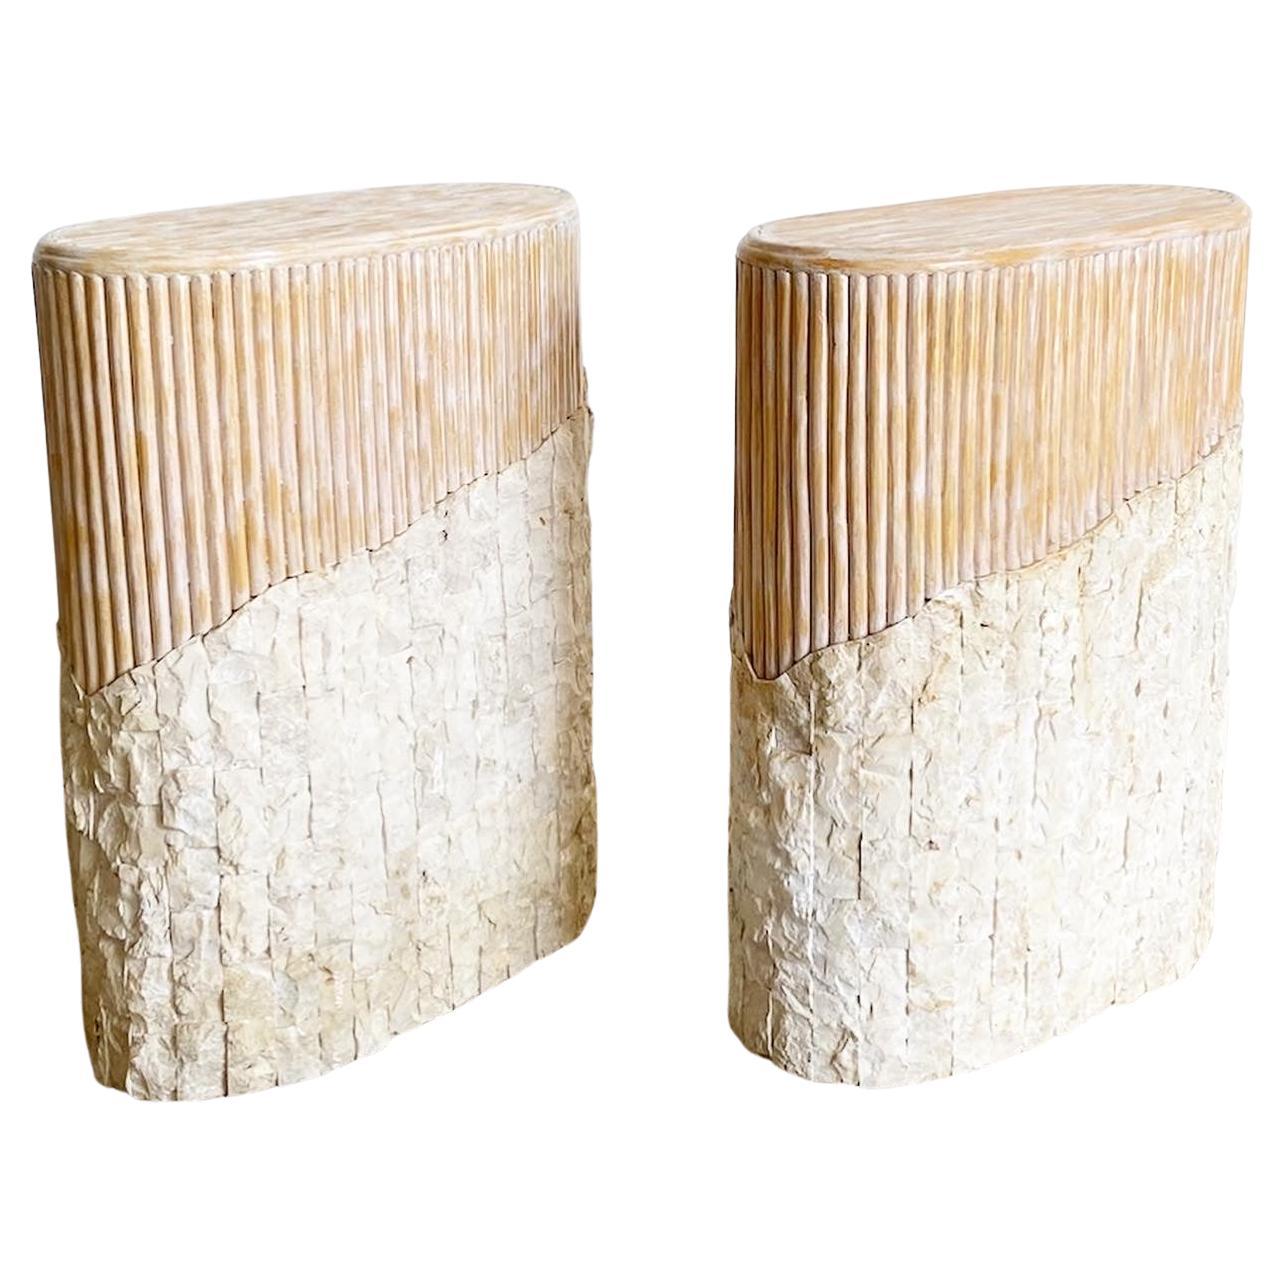 Boho Chic Tessellated Stone and Split Reed Pedestals, a Pair For Sale